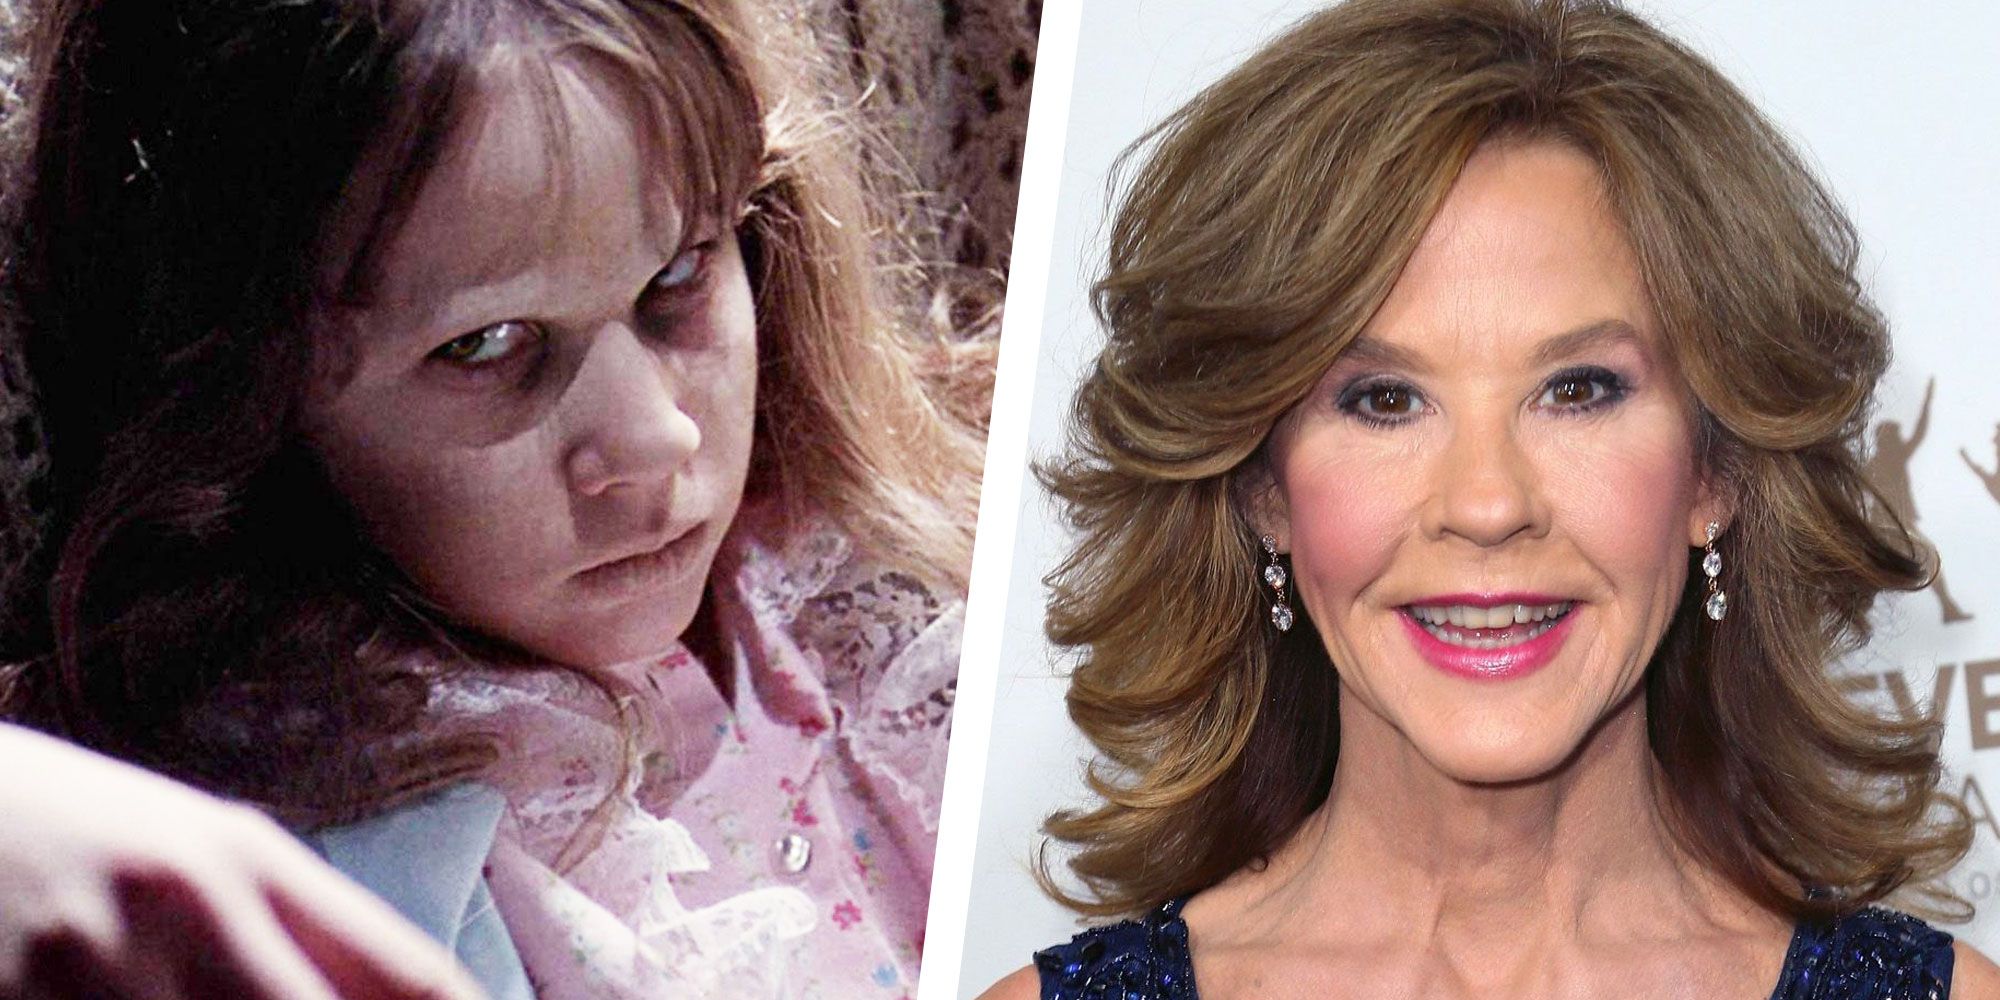 Find Out What Child Actors from Popular Horror Movies Are Doing Now